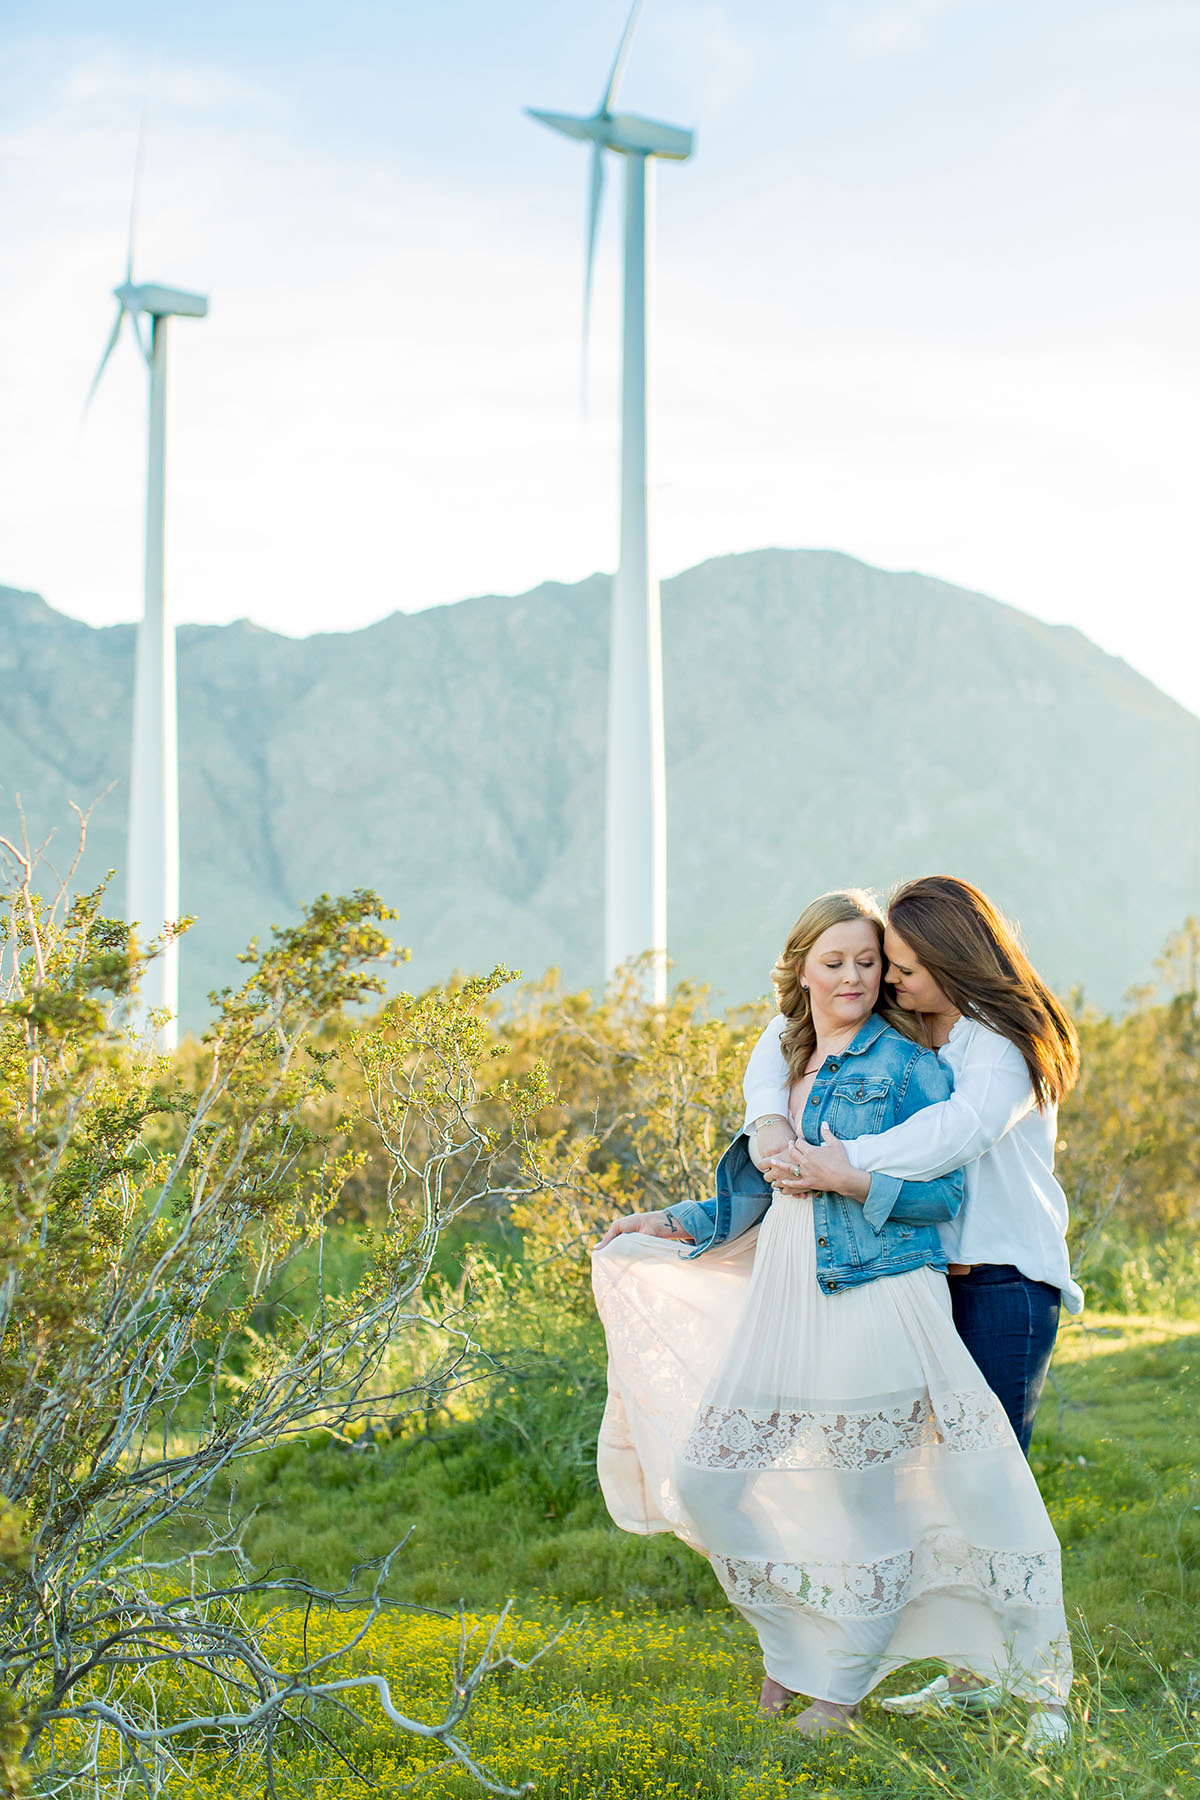 Sunset engagement photos in Palm Springs, California two brides engagement outdoors romantic